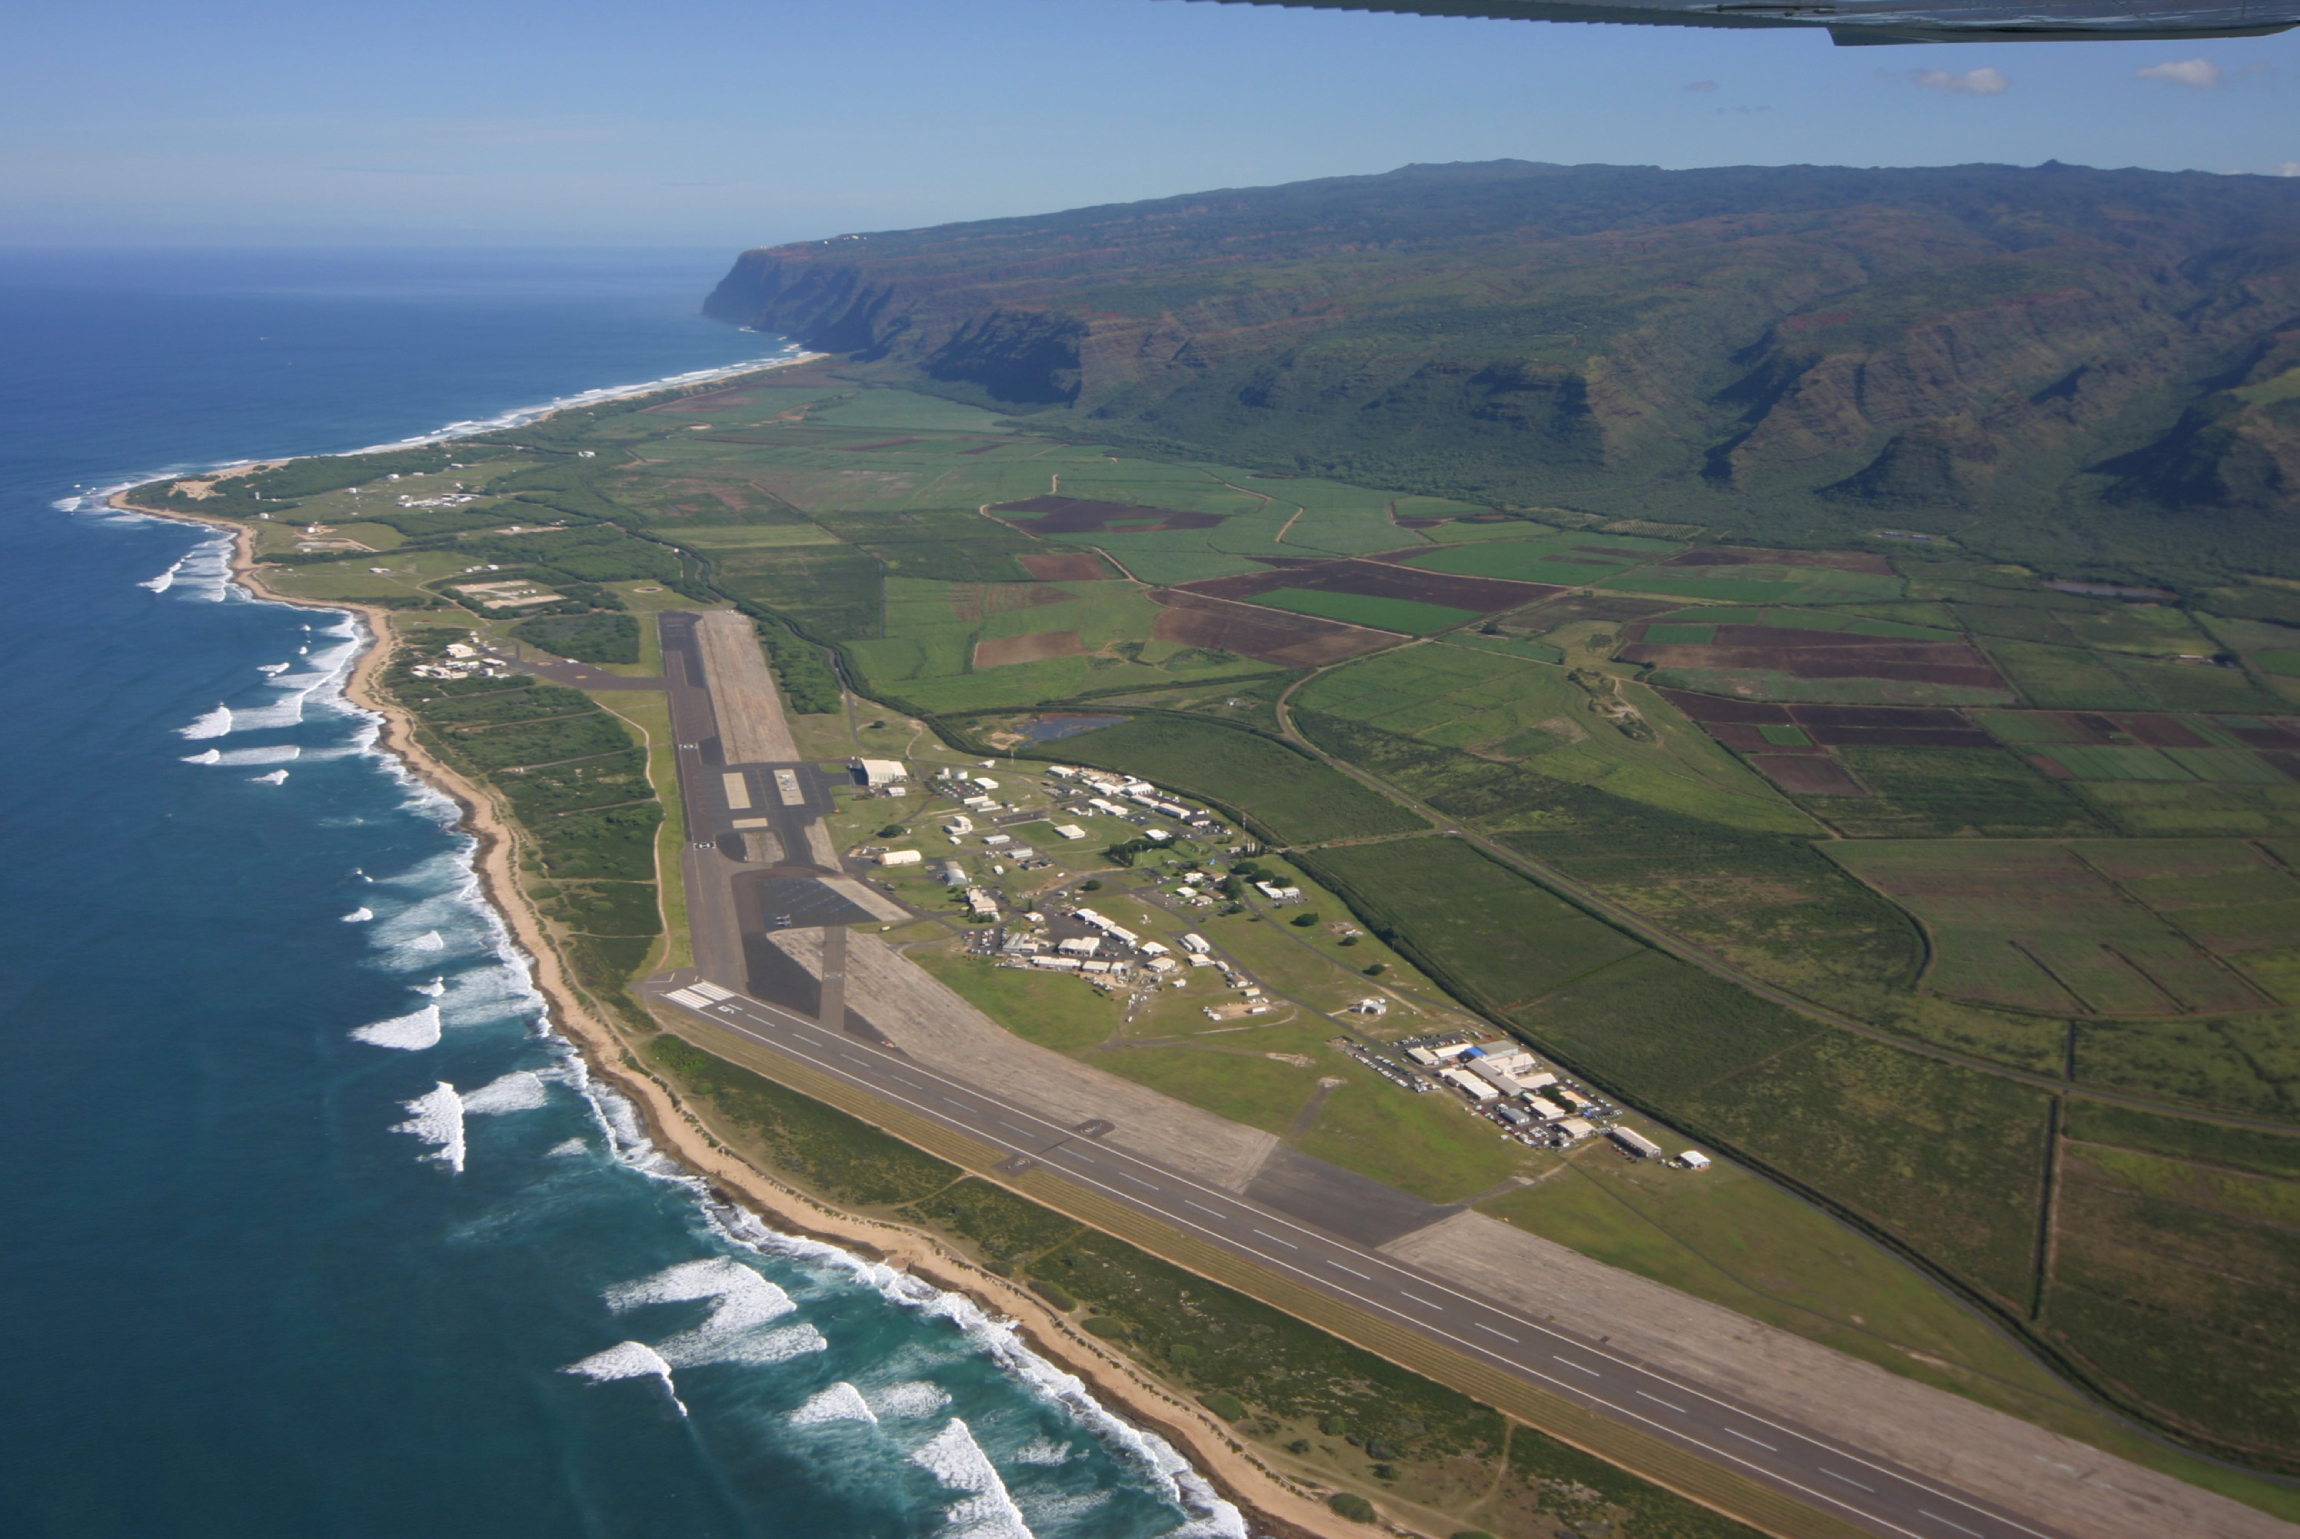 Aerial view of the airfield at the Pacific Missile Range Facility Barking Sands in Kauai County, Hawaii, United States, December 2004. Source: wikimedia.com.